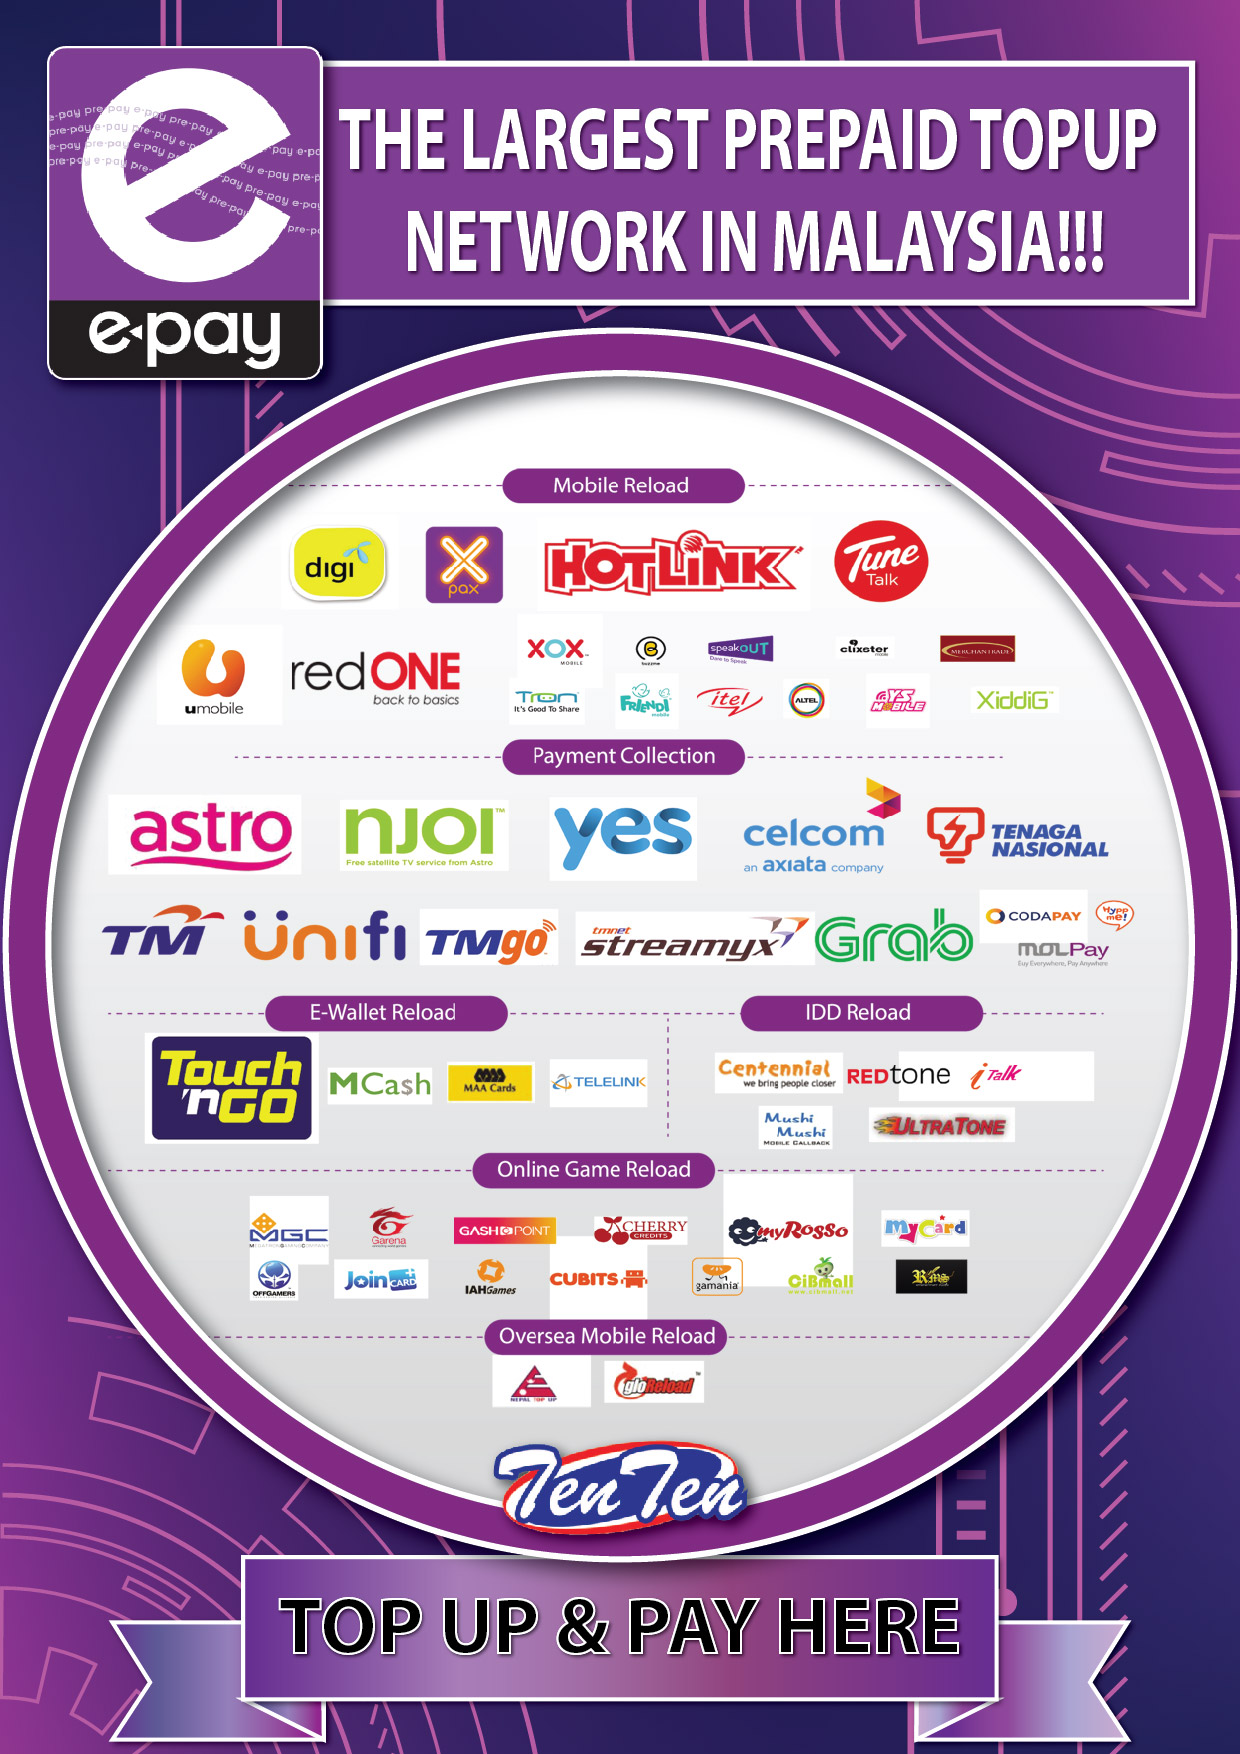 The largest prepaid topup network in malaysia!!